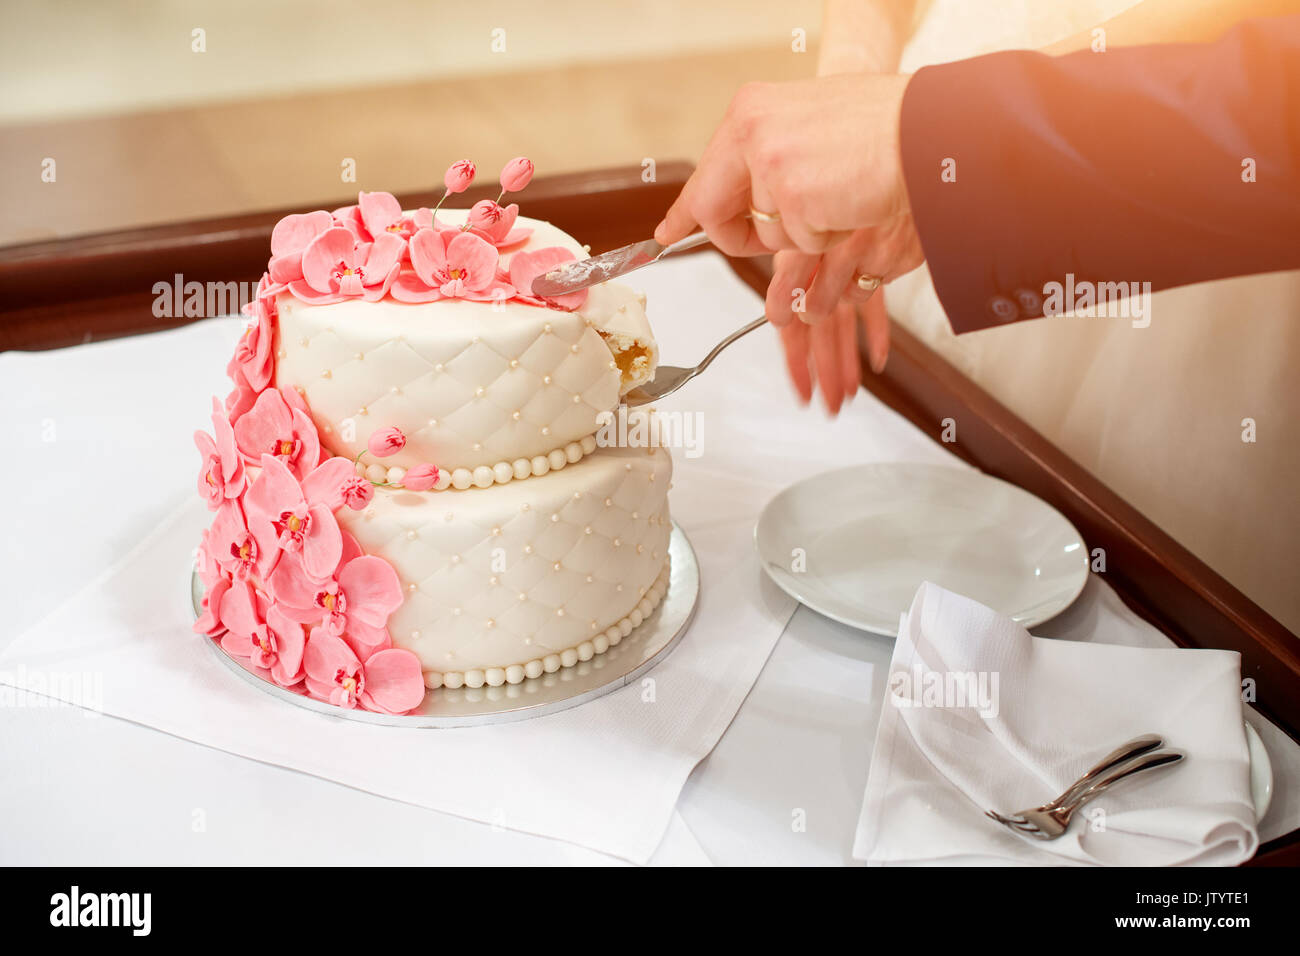 Bride and groom cutting their wedding cake decorated with orchids. Stock Photo